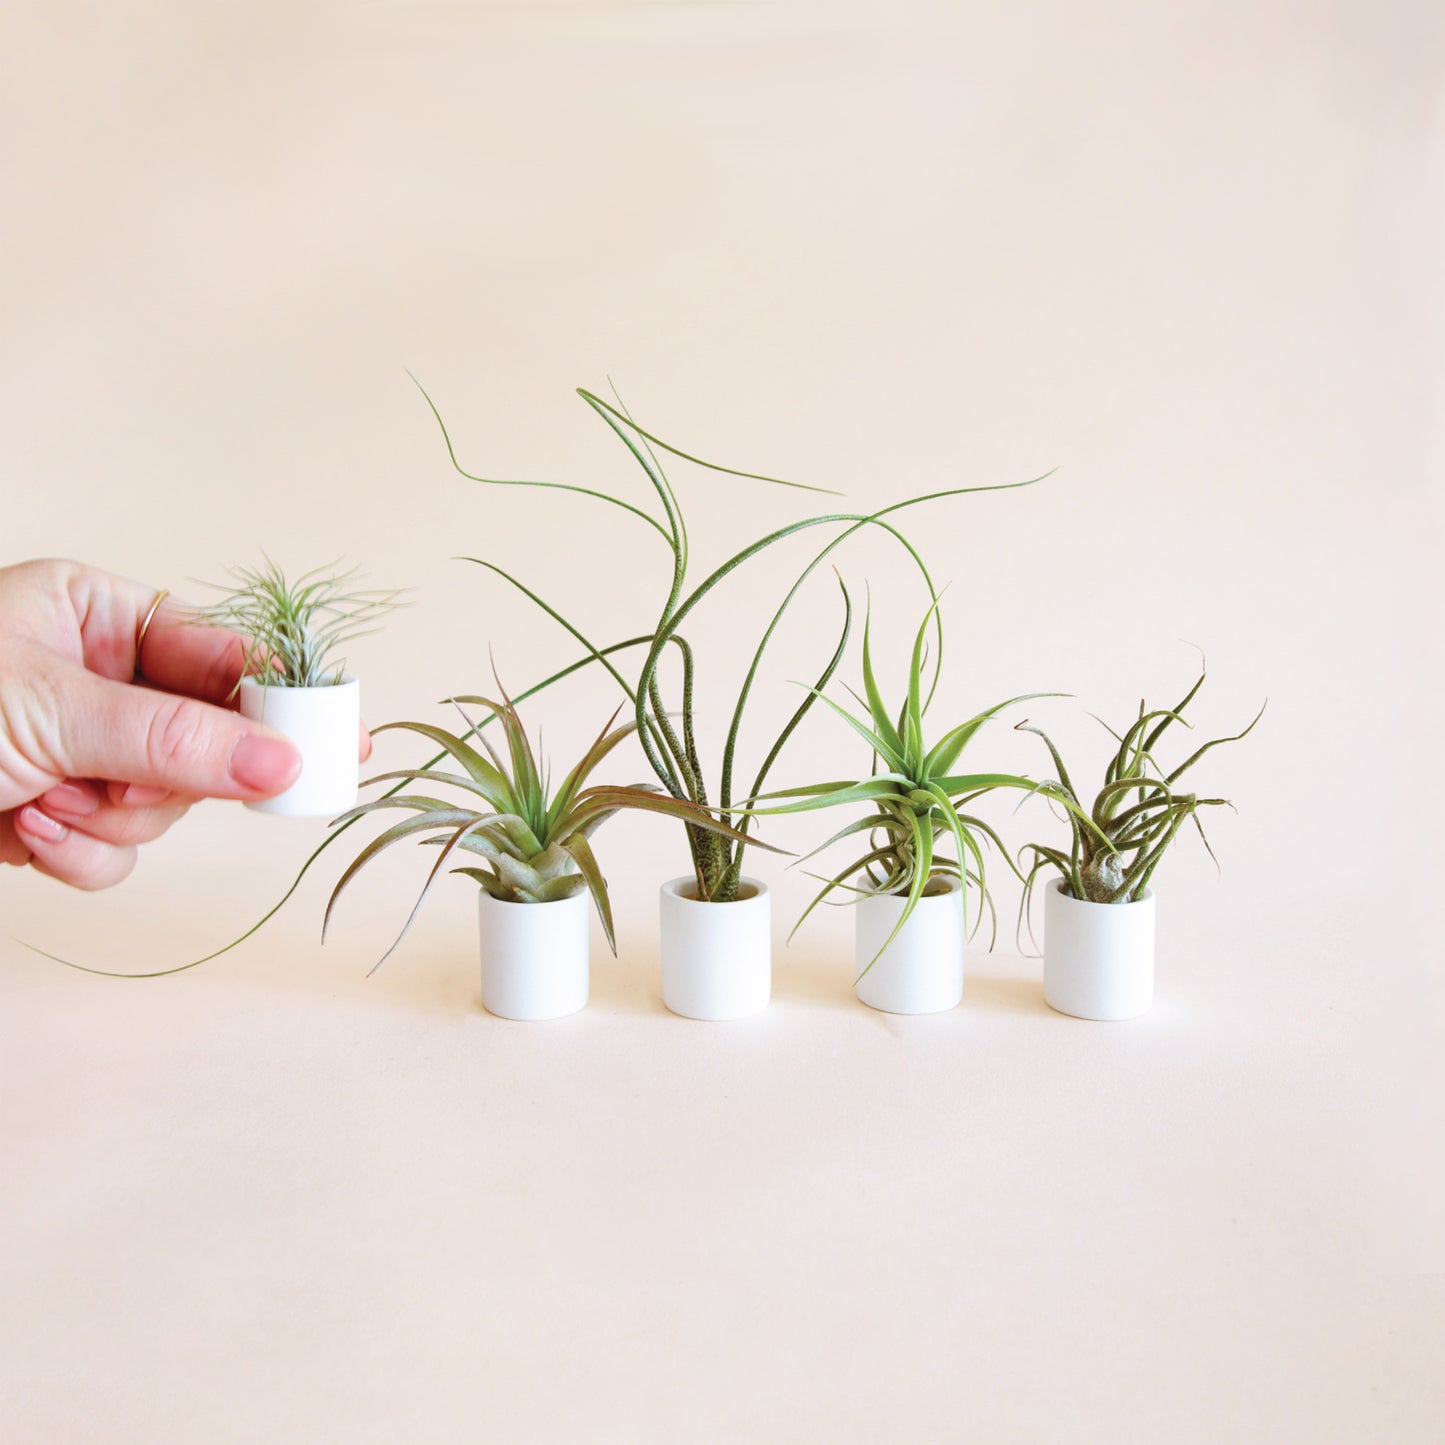 Tiny Pots and Tiny Air Plants Pack